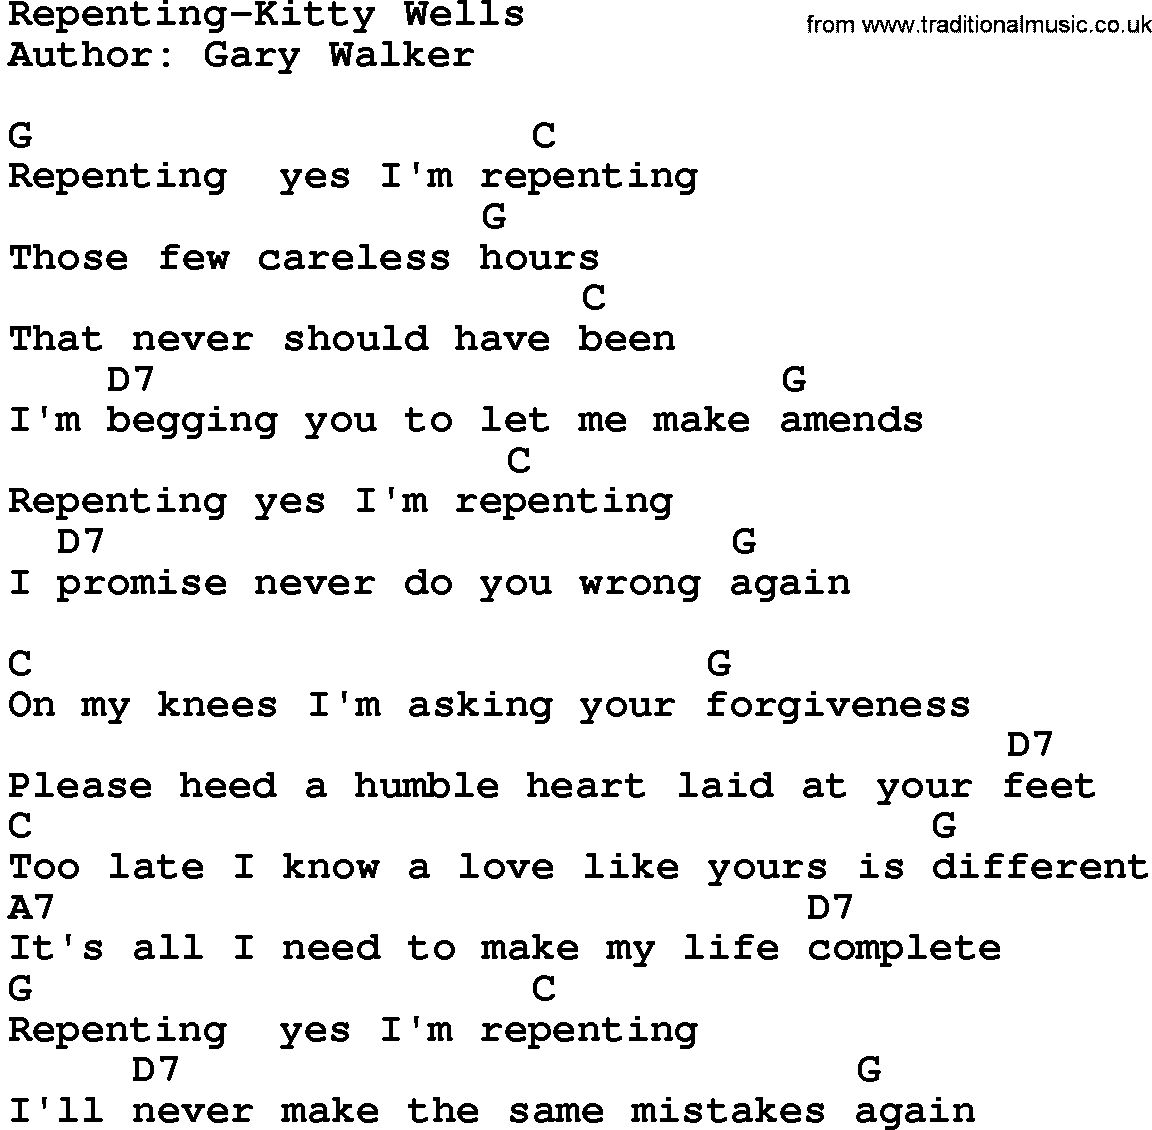 Country music song: Repenting-Kitty Wells lyrics and chords